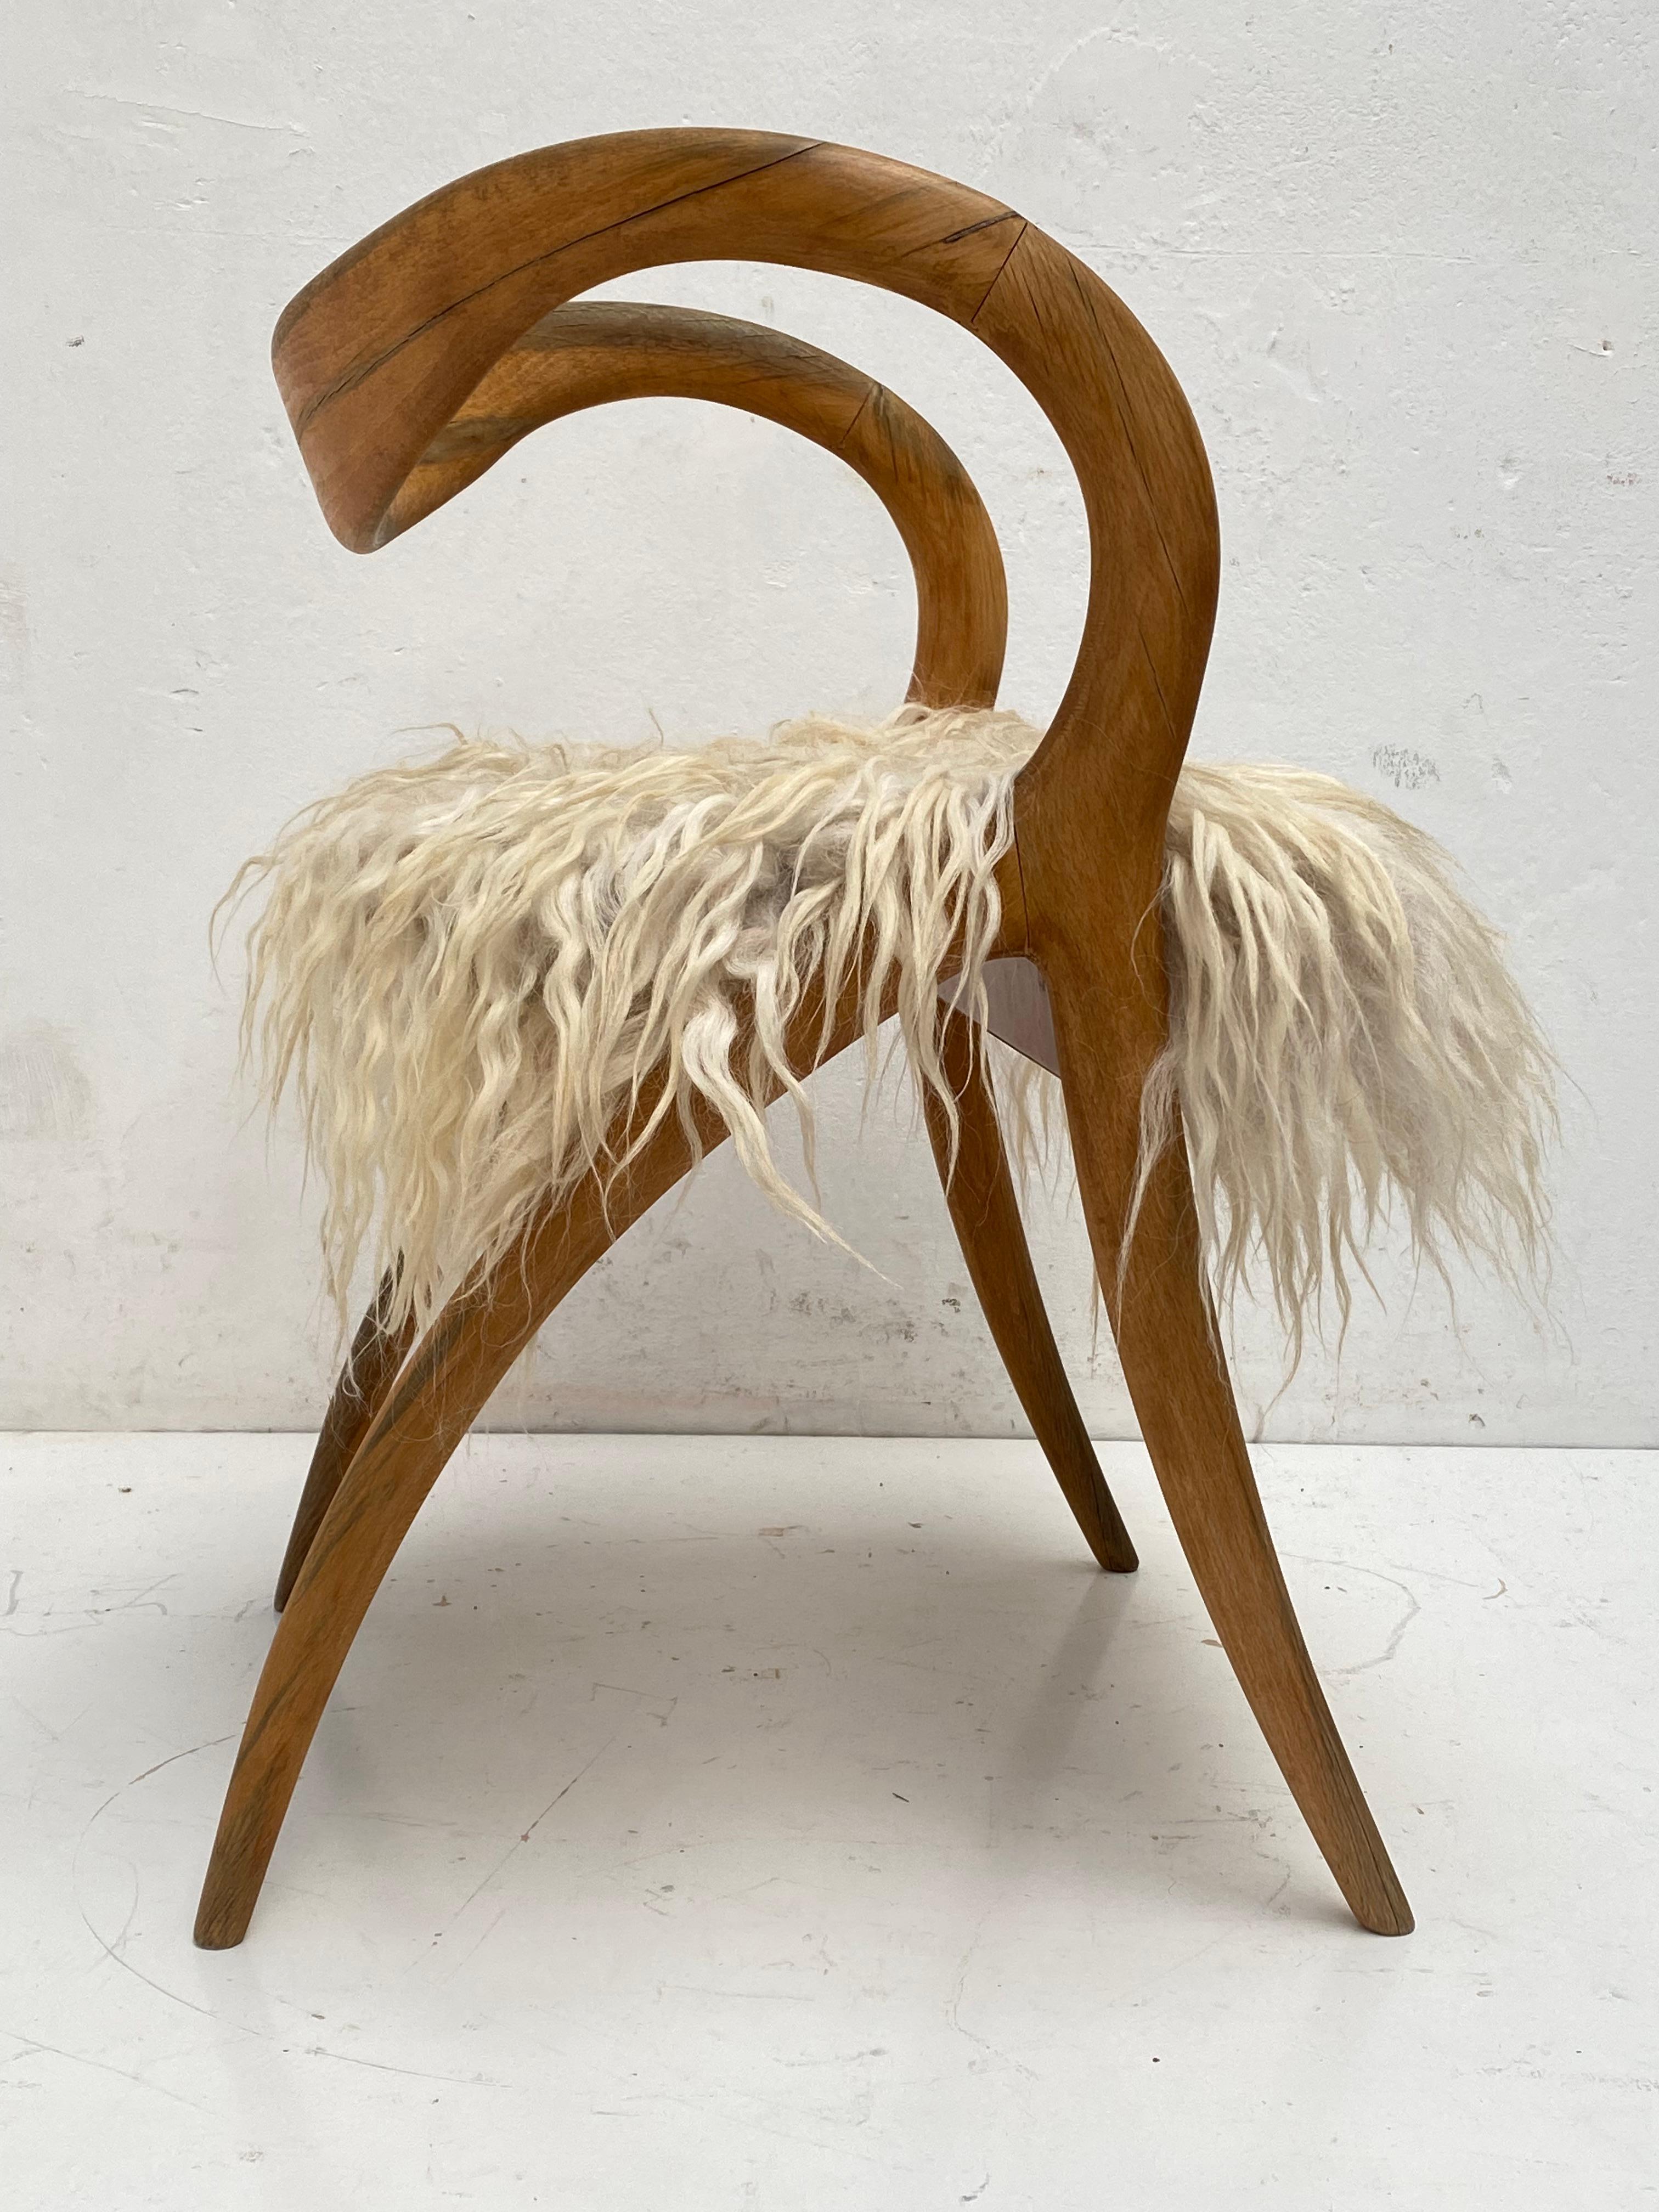 A beautiful side chair by Italian designer A. Sibau

Lovely sculptural design in solid Birch wood

We upholstered this chair with animal friendly hand felted Islandic Sheep wool to give it an organic appearance that is matching with the sculptural